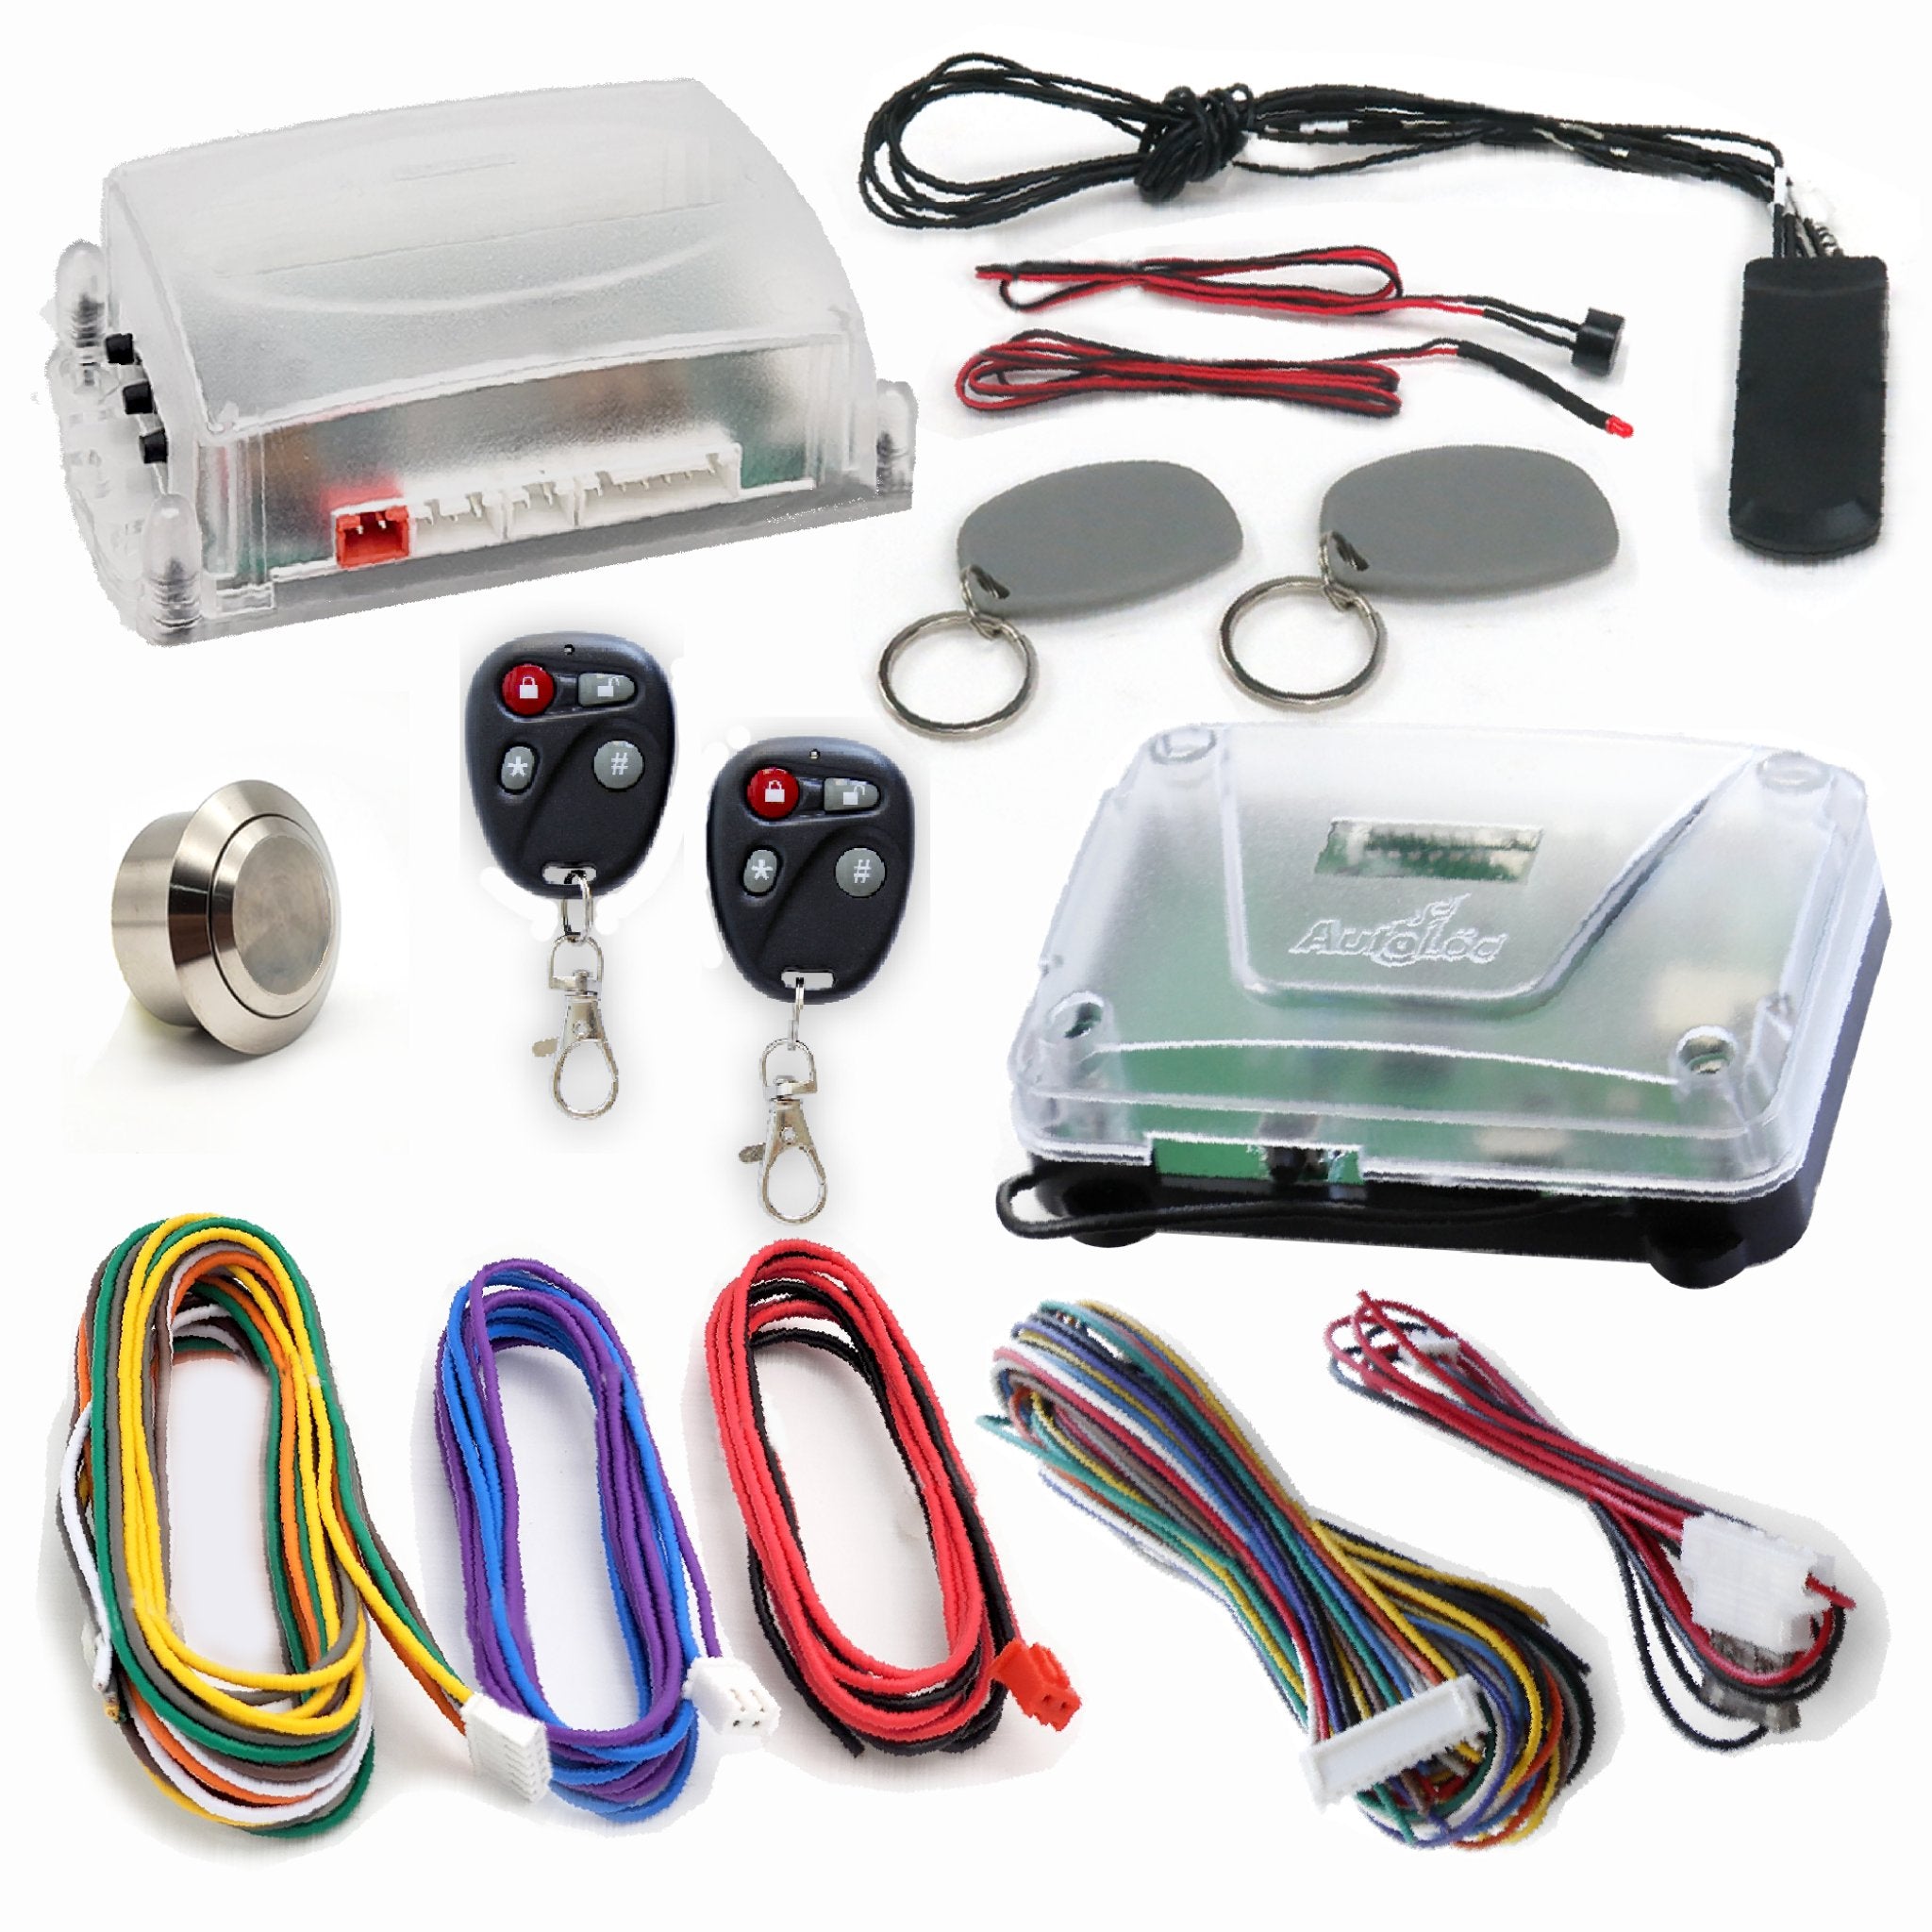 GM Engine Start Modules with RFID, Remotes, Column Insert and Button